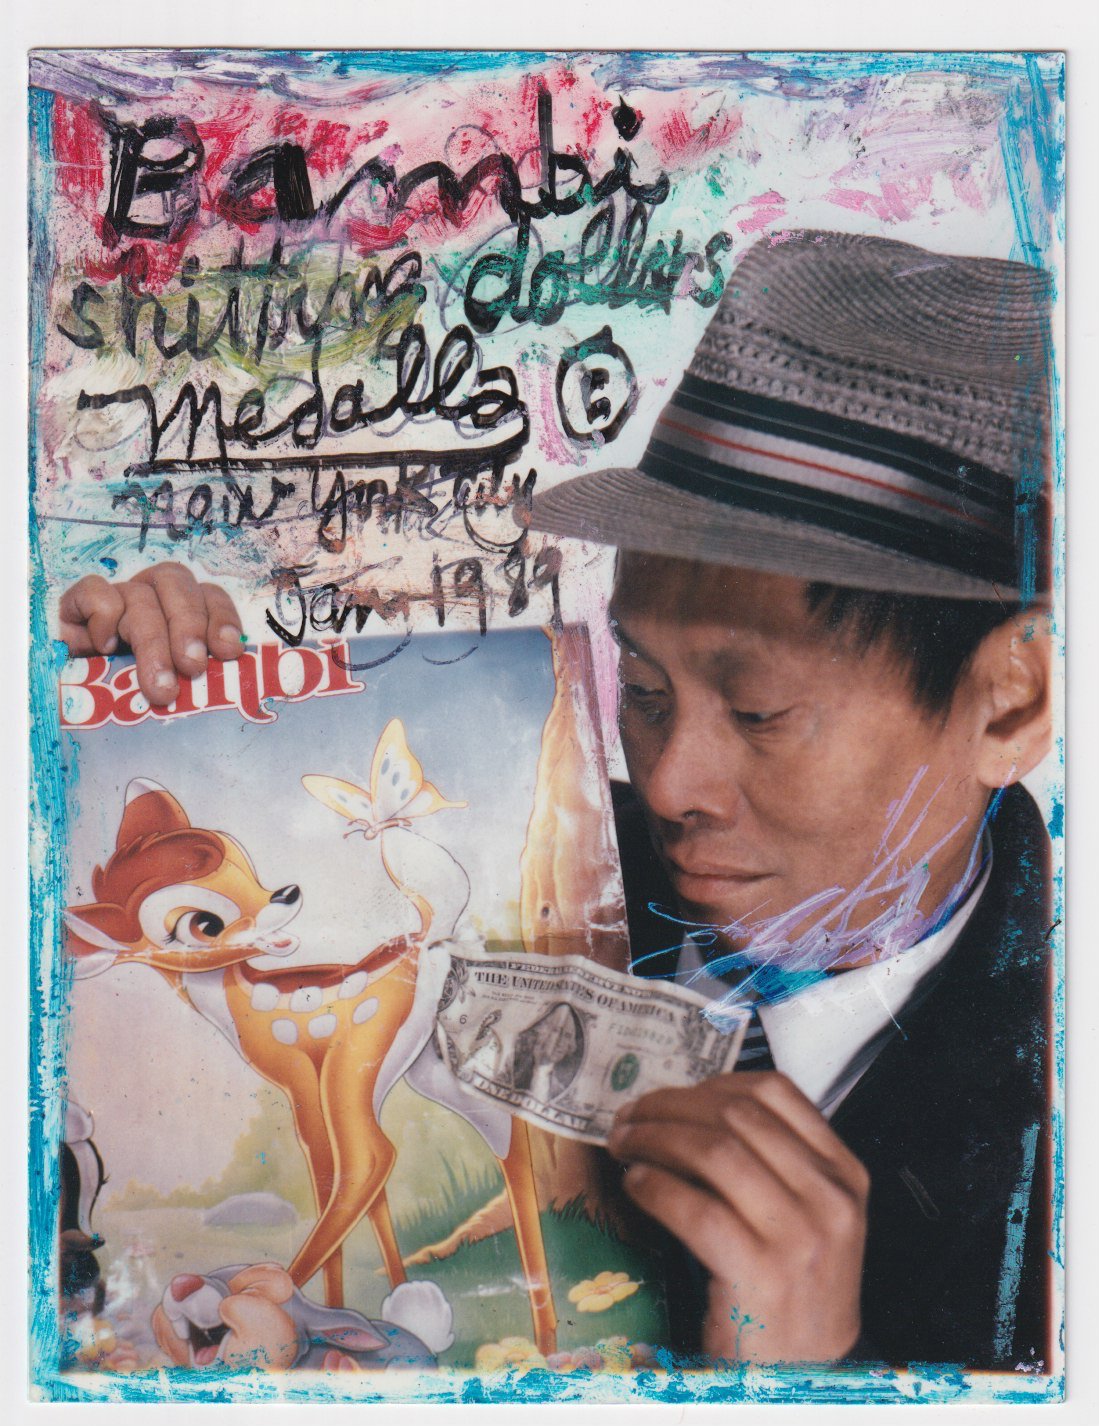 David Medalla, Bambi Shitting Dollars, 1989, collage on paper. Courtesy private collection. Photo: Mareike Tocha